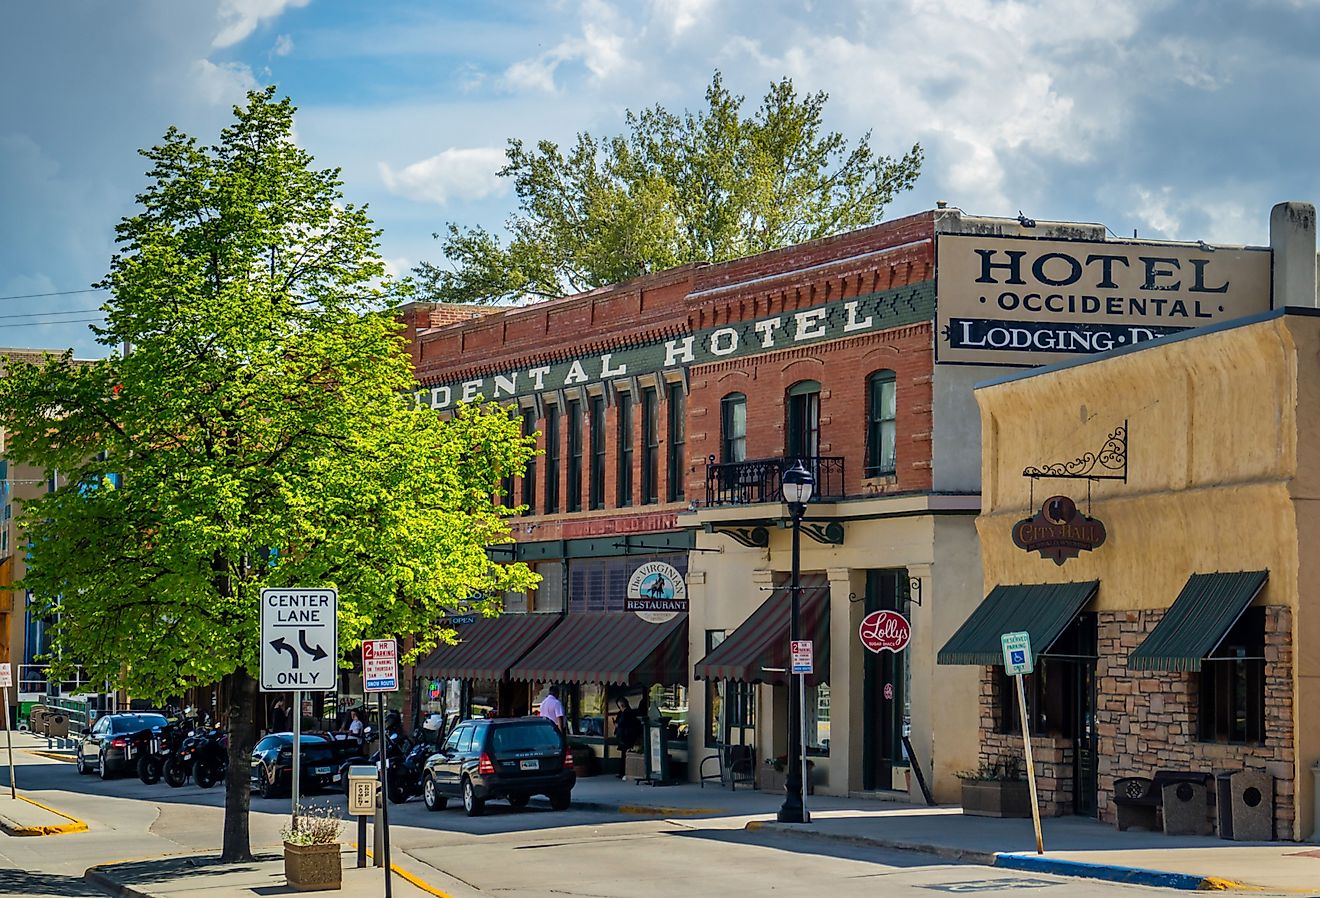 The Occidental Hotel Lodging and dining along the city. Image credit Cheri Alguire via Shutterstock.